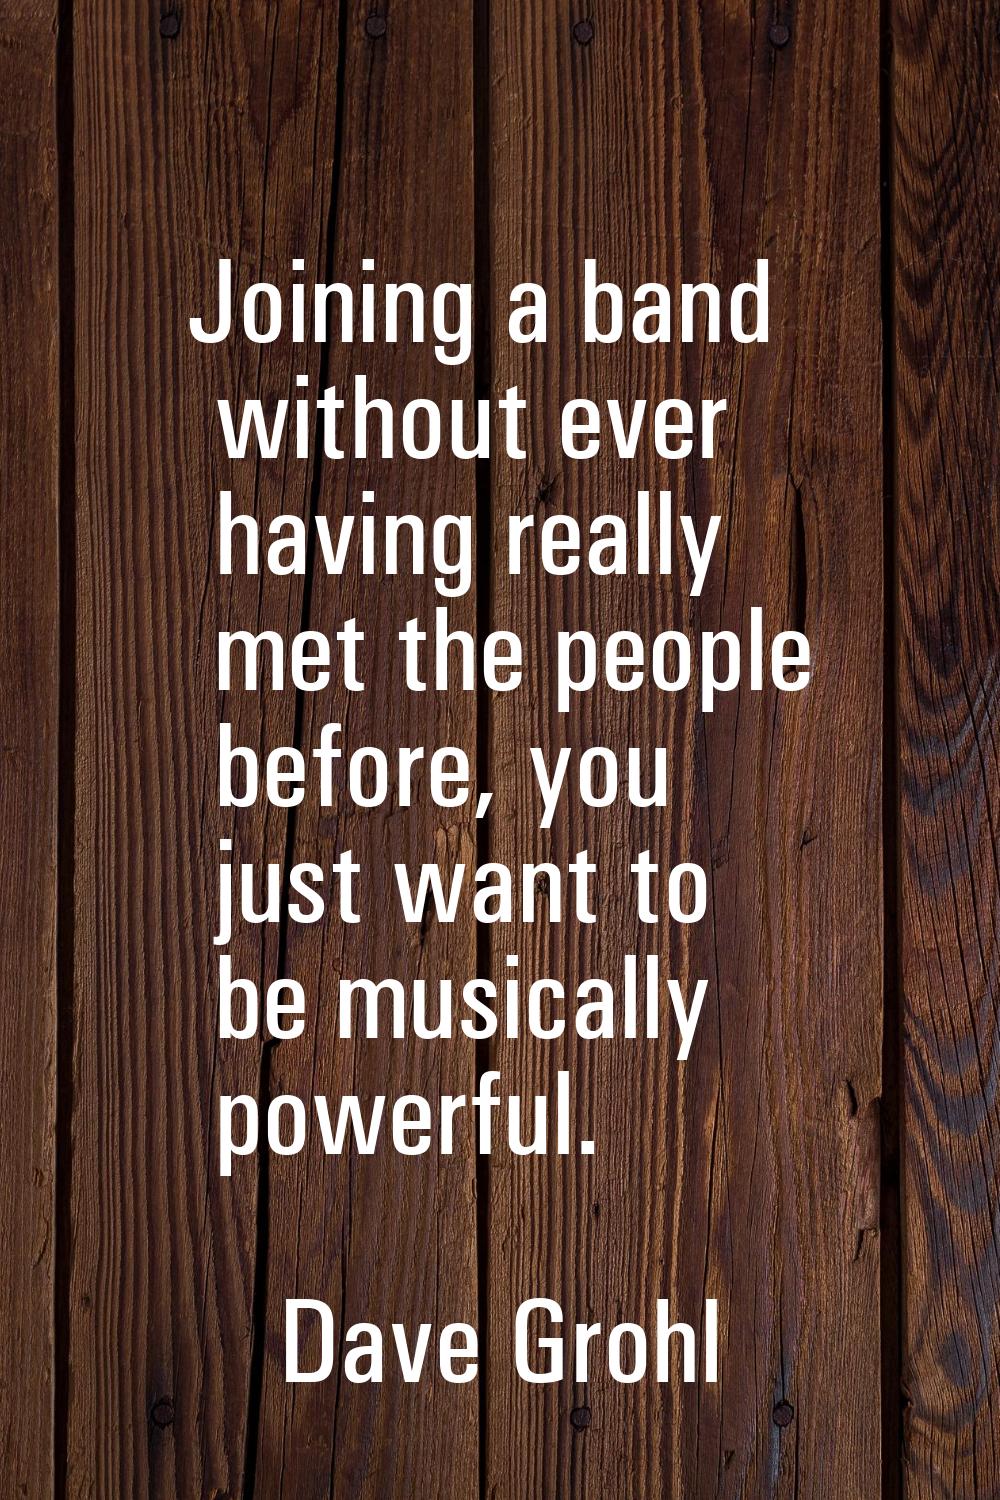 Joining a band without ever having really met the people before, you just want to be musically powe